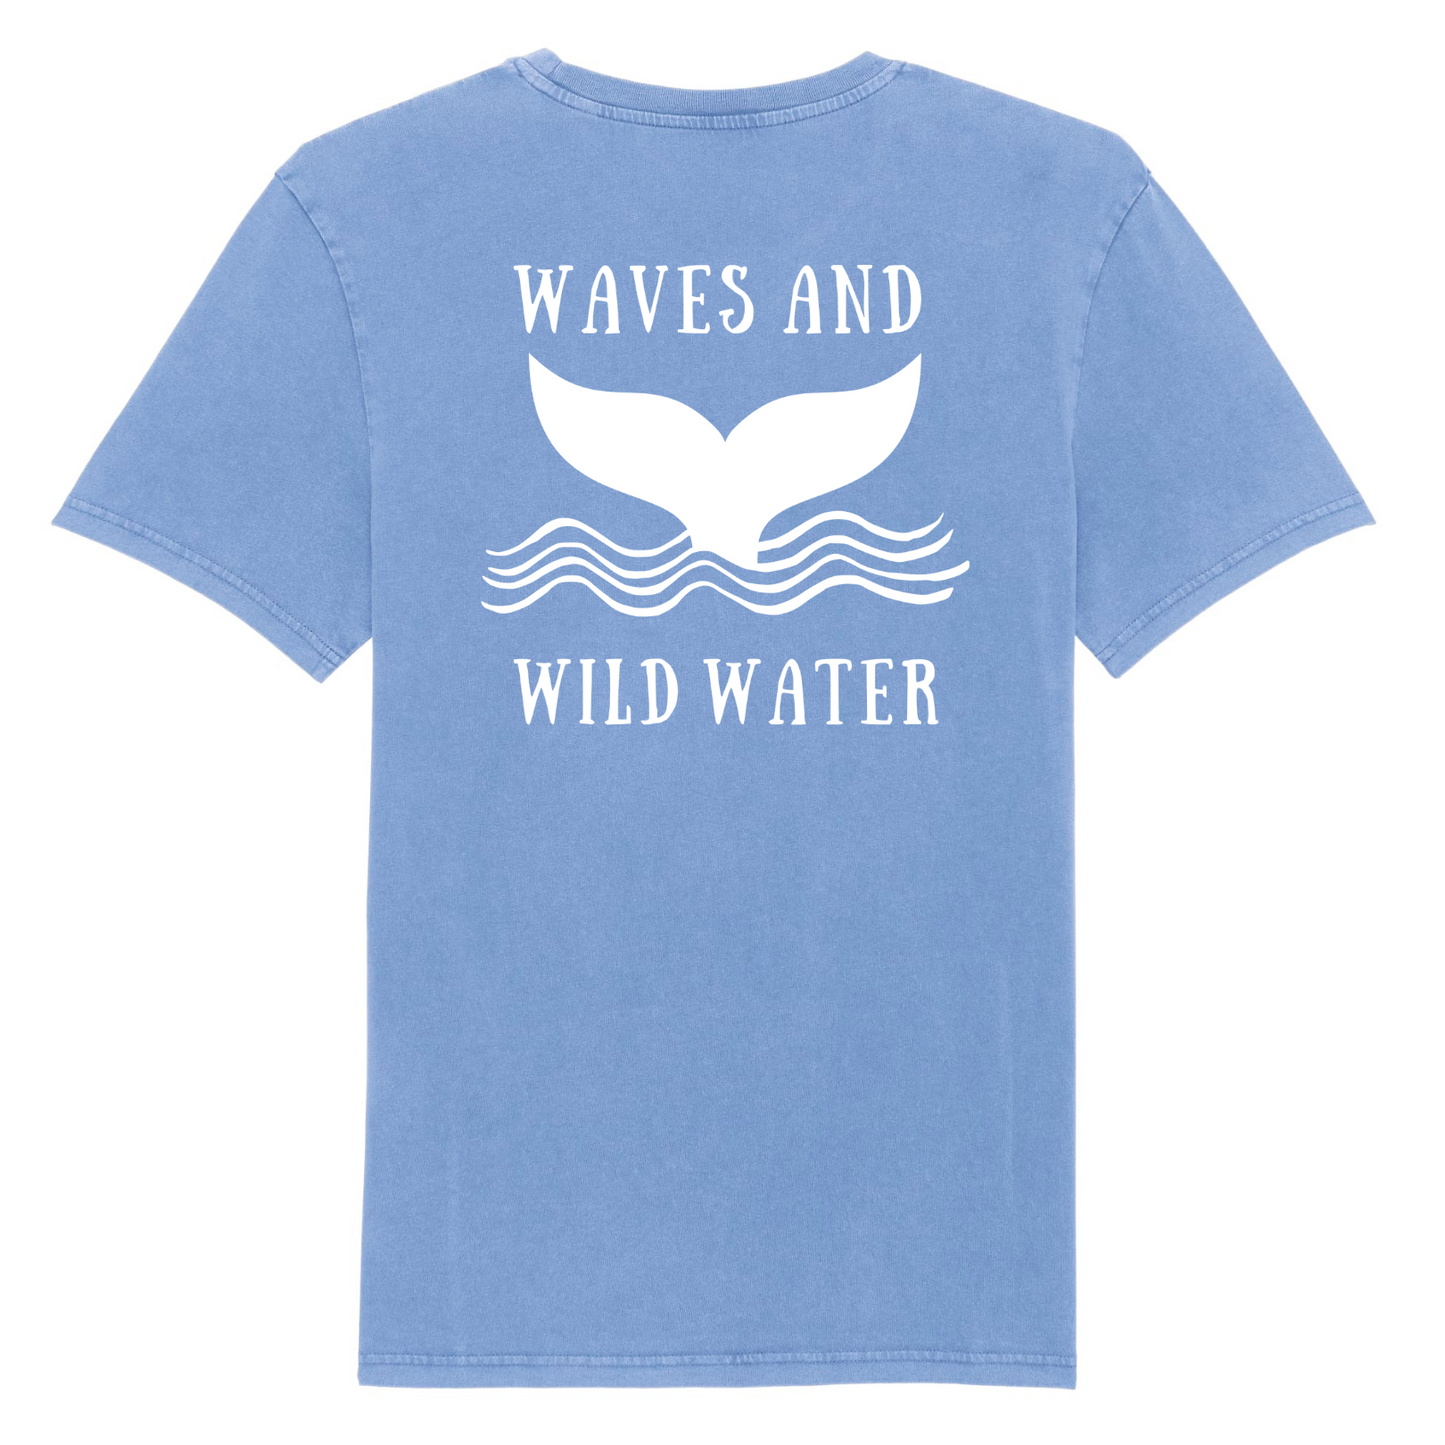 The back of a blue t-shirt with Waves & Wild Water logo, depicting a whale tail coming out of waves, printed in white ink.